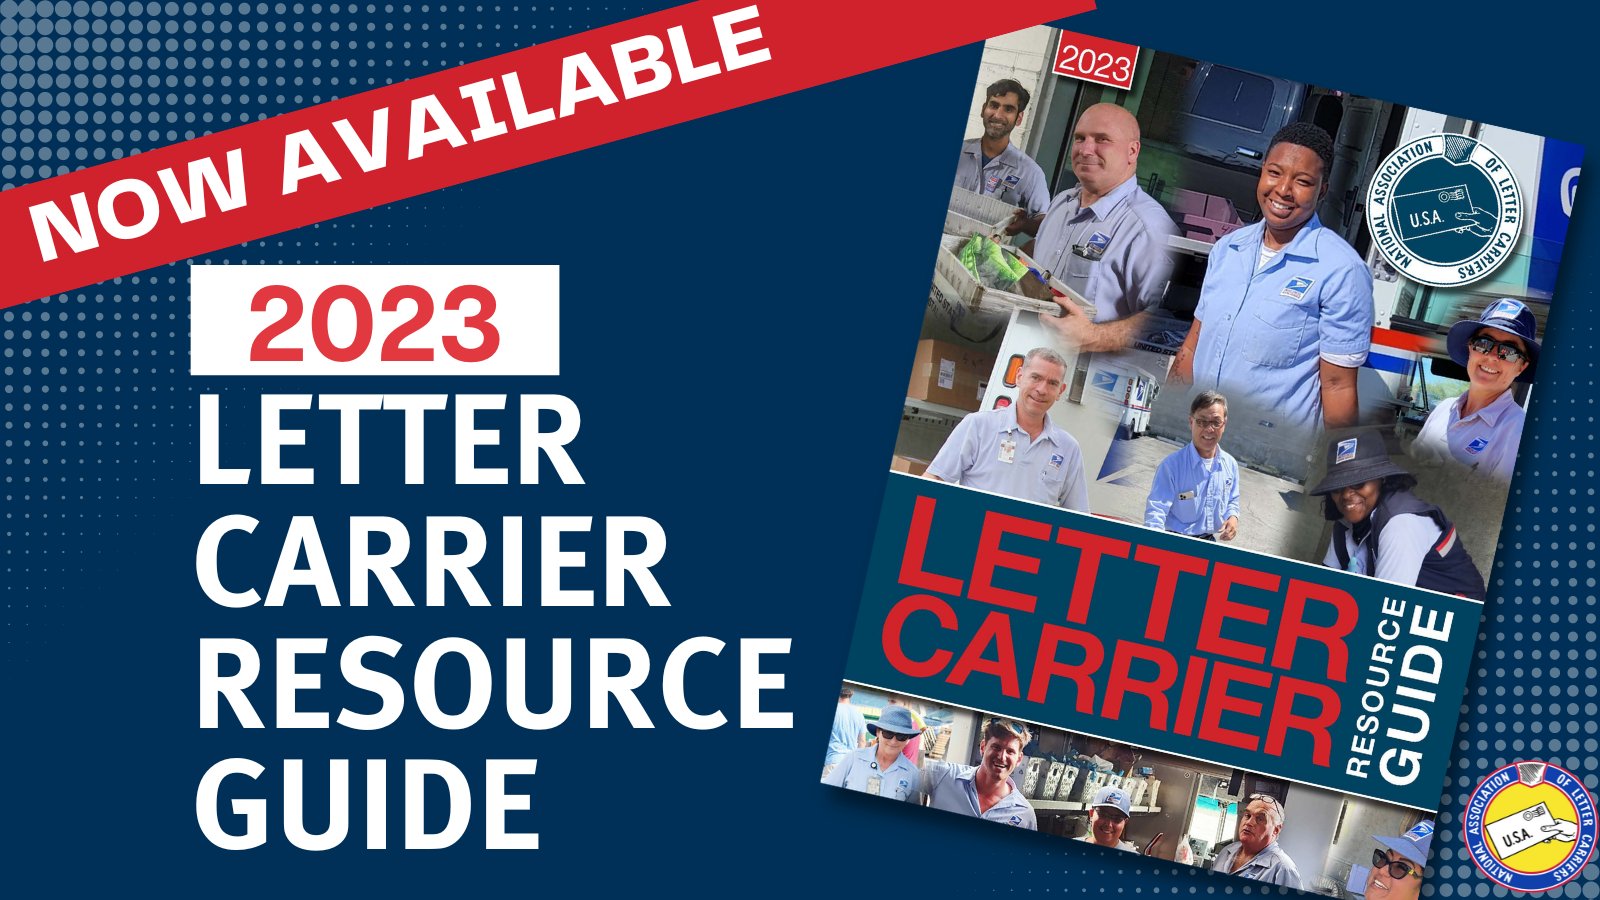 NALC’s 2023 Letter Carrier Resource Guide is available online 21st